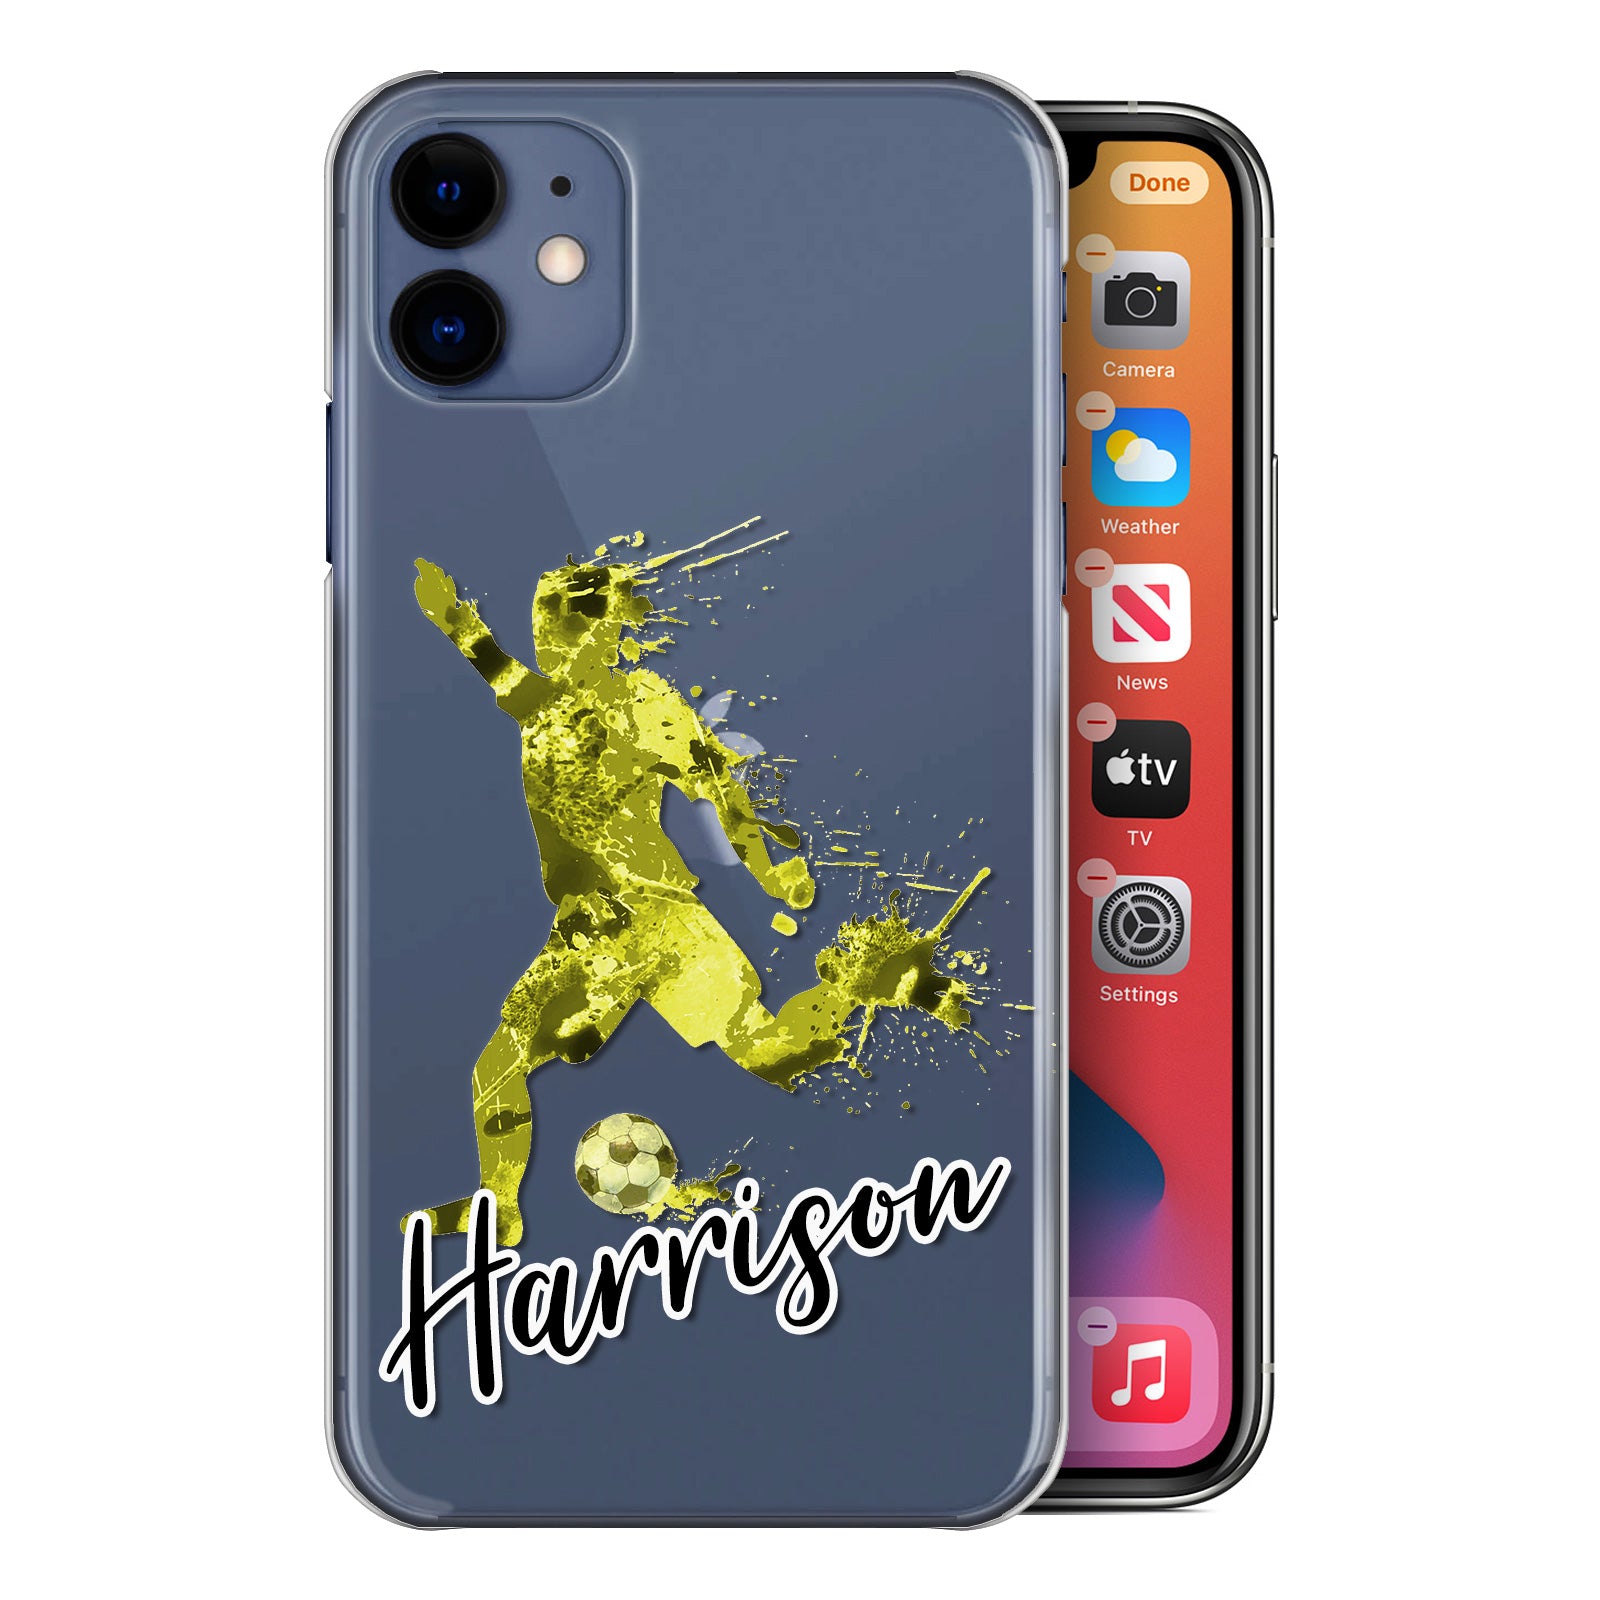 Personalised Xiaomi Phone Hard Case - Zesty Yellow Football Star with White Outlined Text